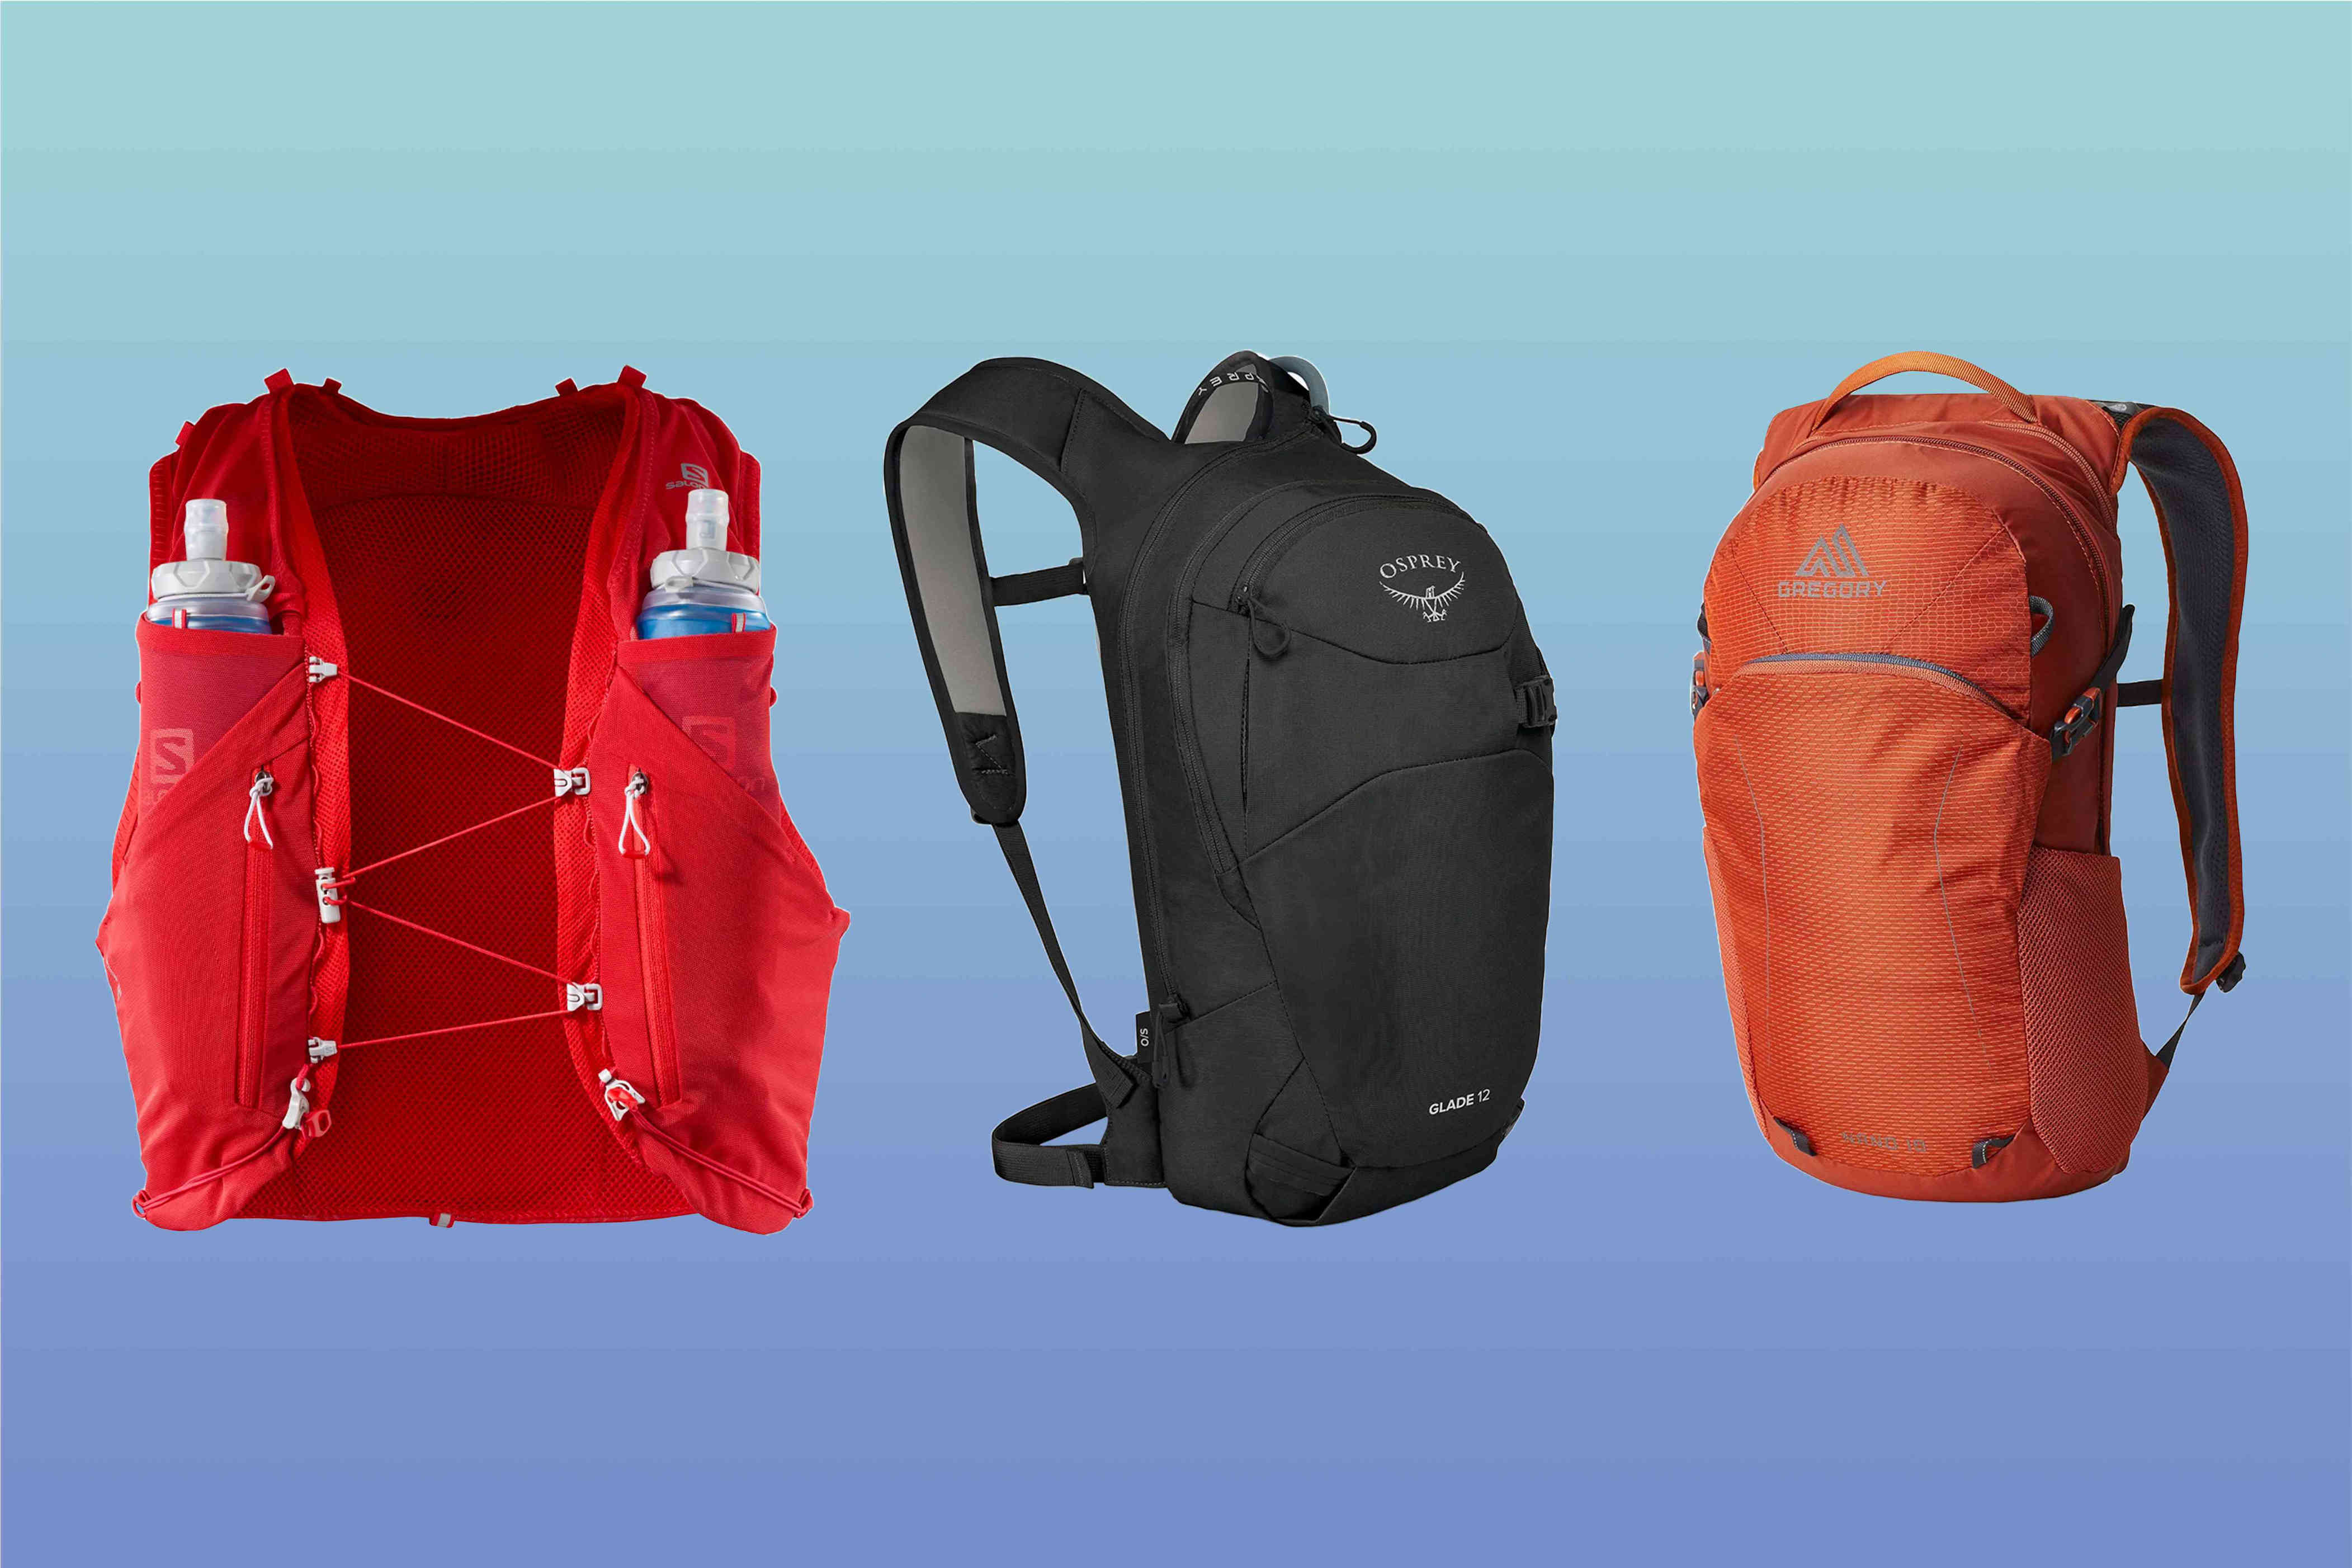 The Best Hydration Packs for Skiing, Hiking, and More